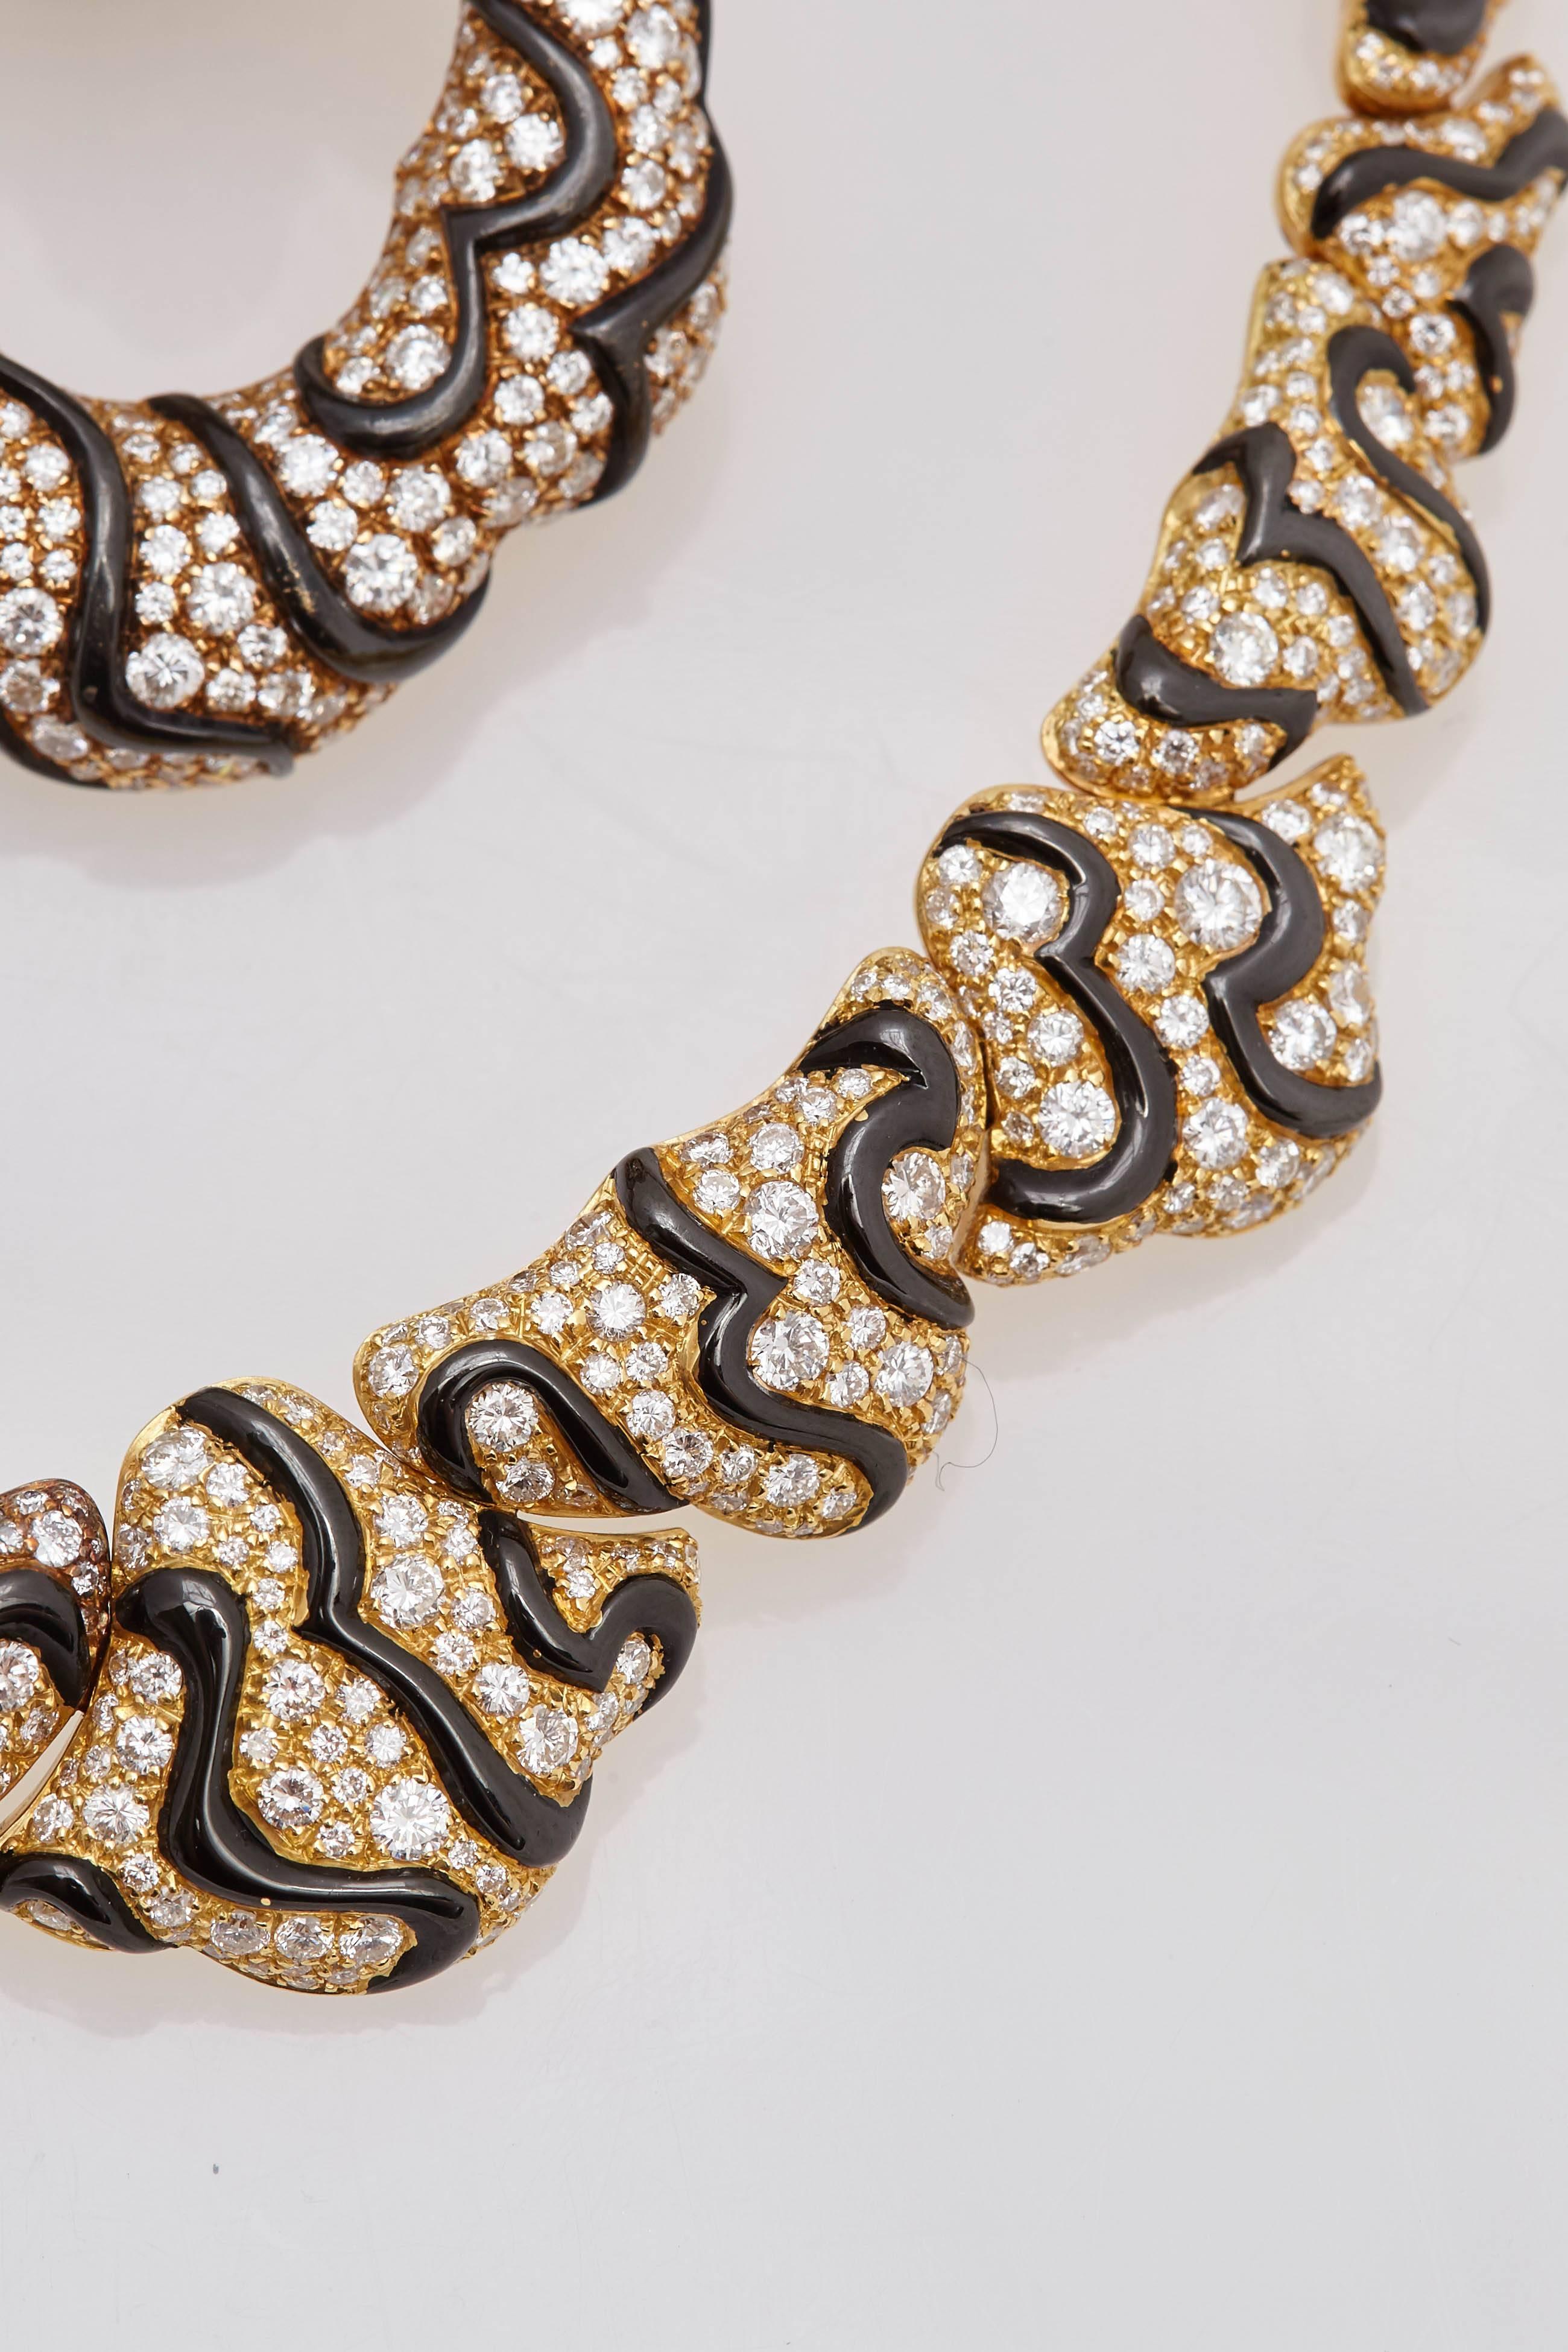 A beautiful one-of-a-kind necklace by Marina B, made in 18kt yellow and blackened gold, highlighted with fine quality brilliant cut diamonds. Made in Italy, circa 1983

Please note that the earrings in the picture have been sold. 